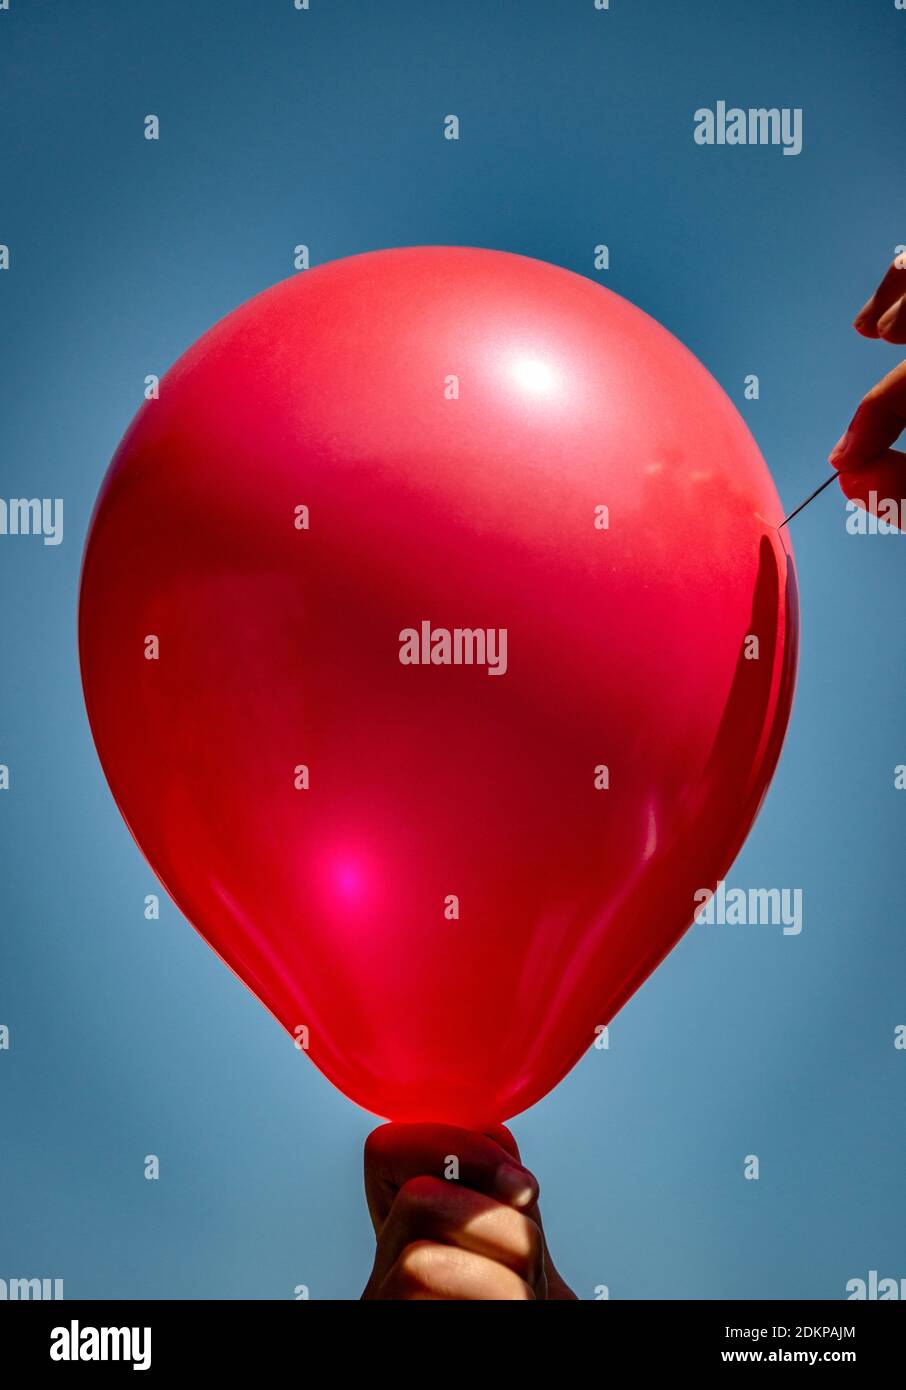 hands holding a red balloon and a pin threatening to pop it, needle against  the balloon, against a bright blue sky Stock Photo - Alamy